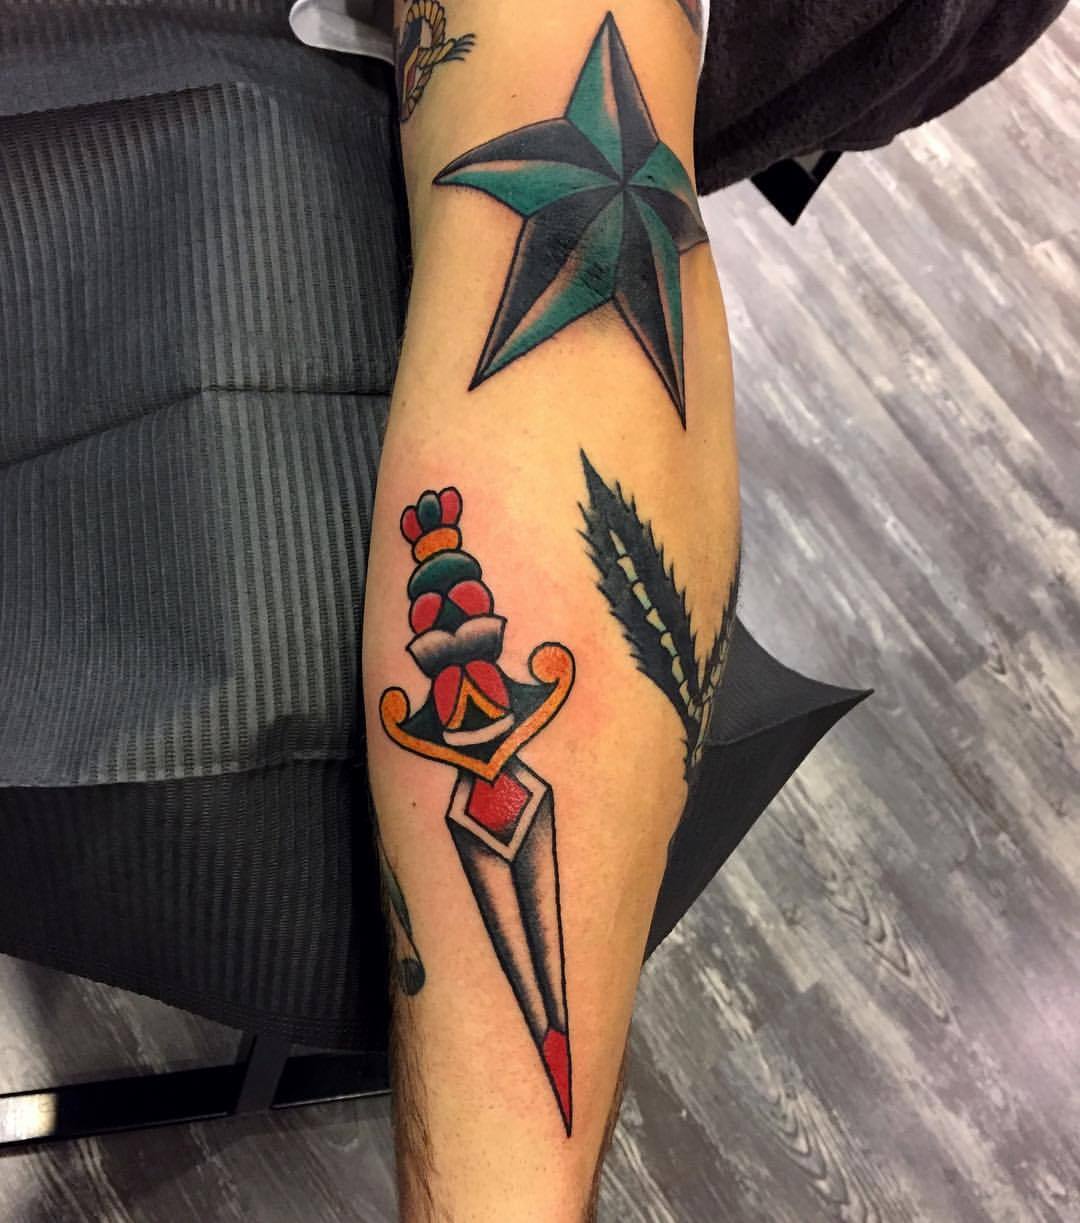 Got my first tattoo at a convention last weekend by Justin at Black Dagger  Tattoo Collective OH  rtraditionaltattoos